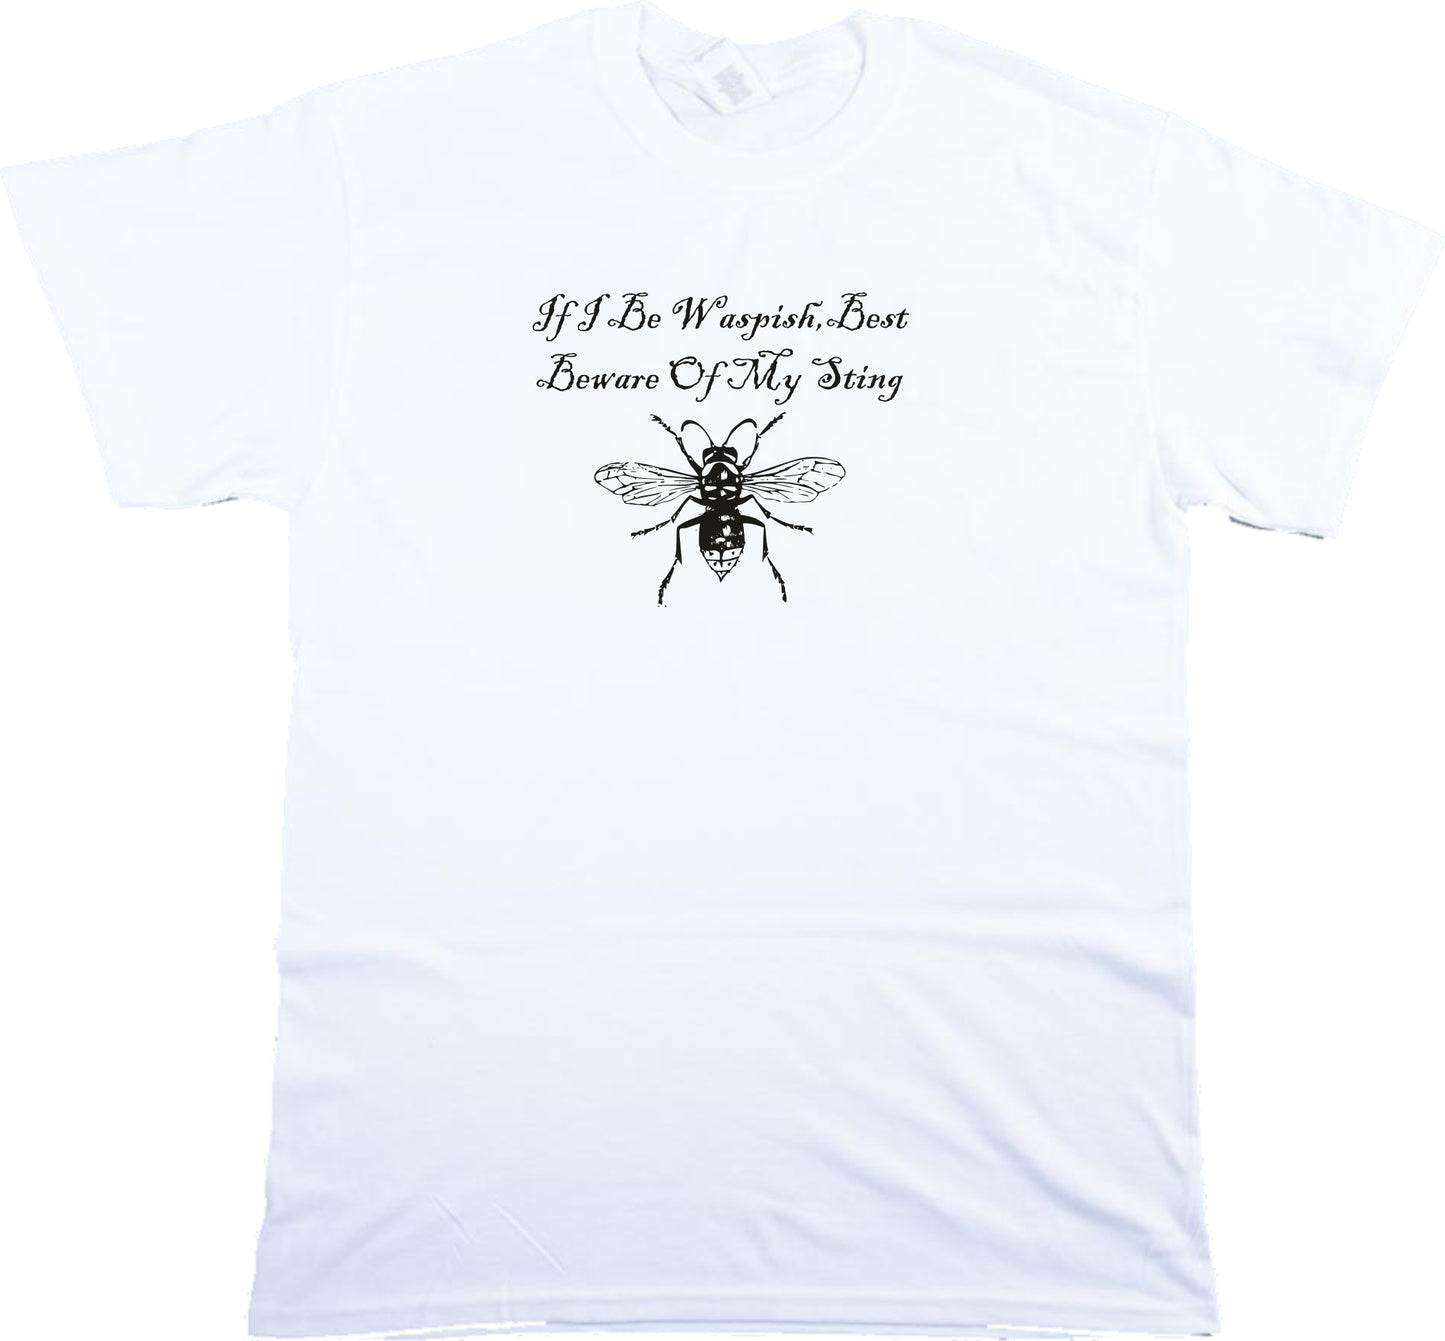 Shakespeare 'Wasp' T-Shirt - The Taming of the Shrew, Waspish Quote, Various Colours